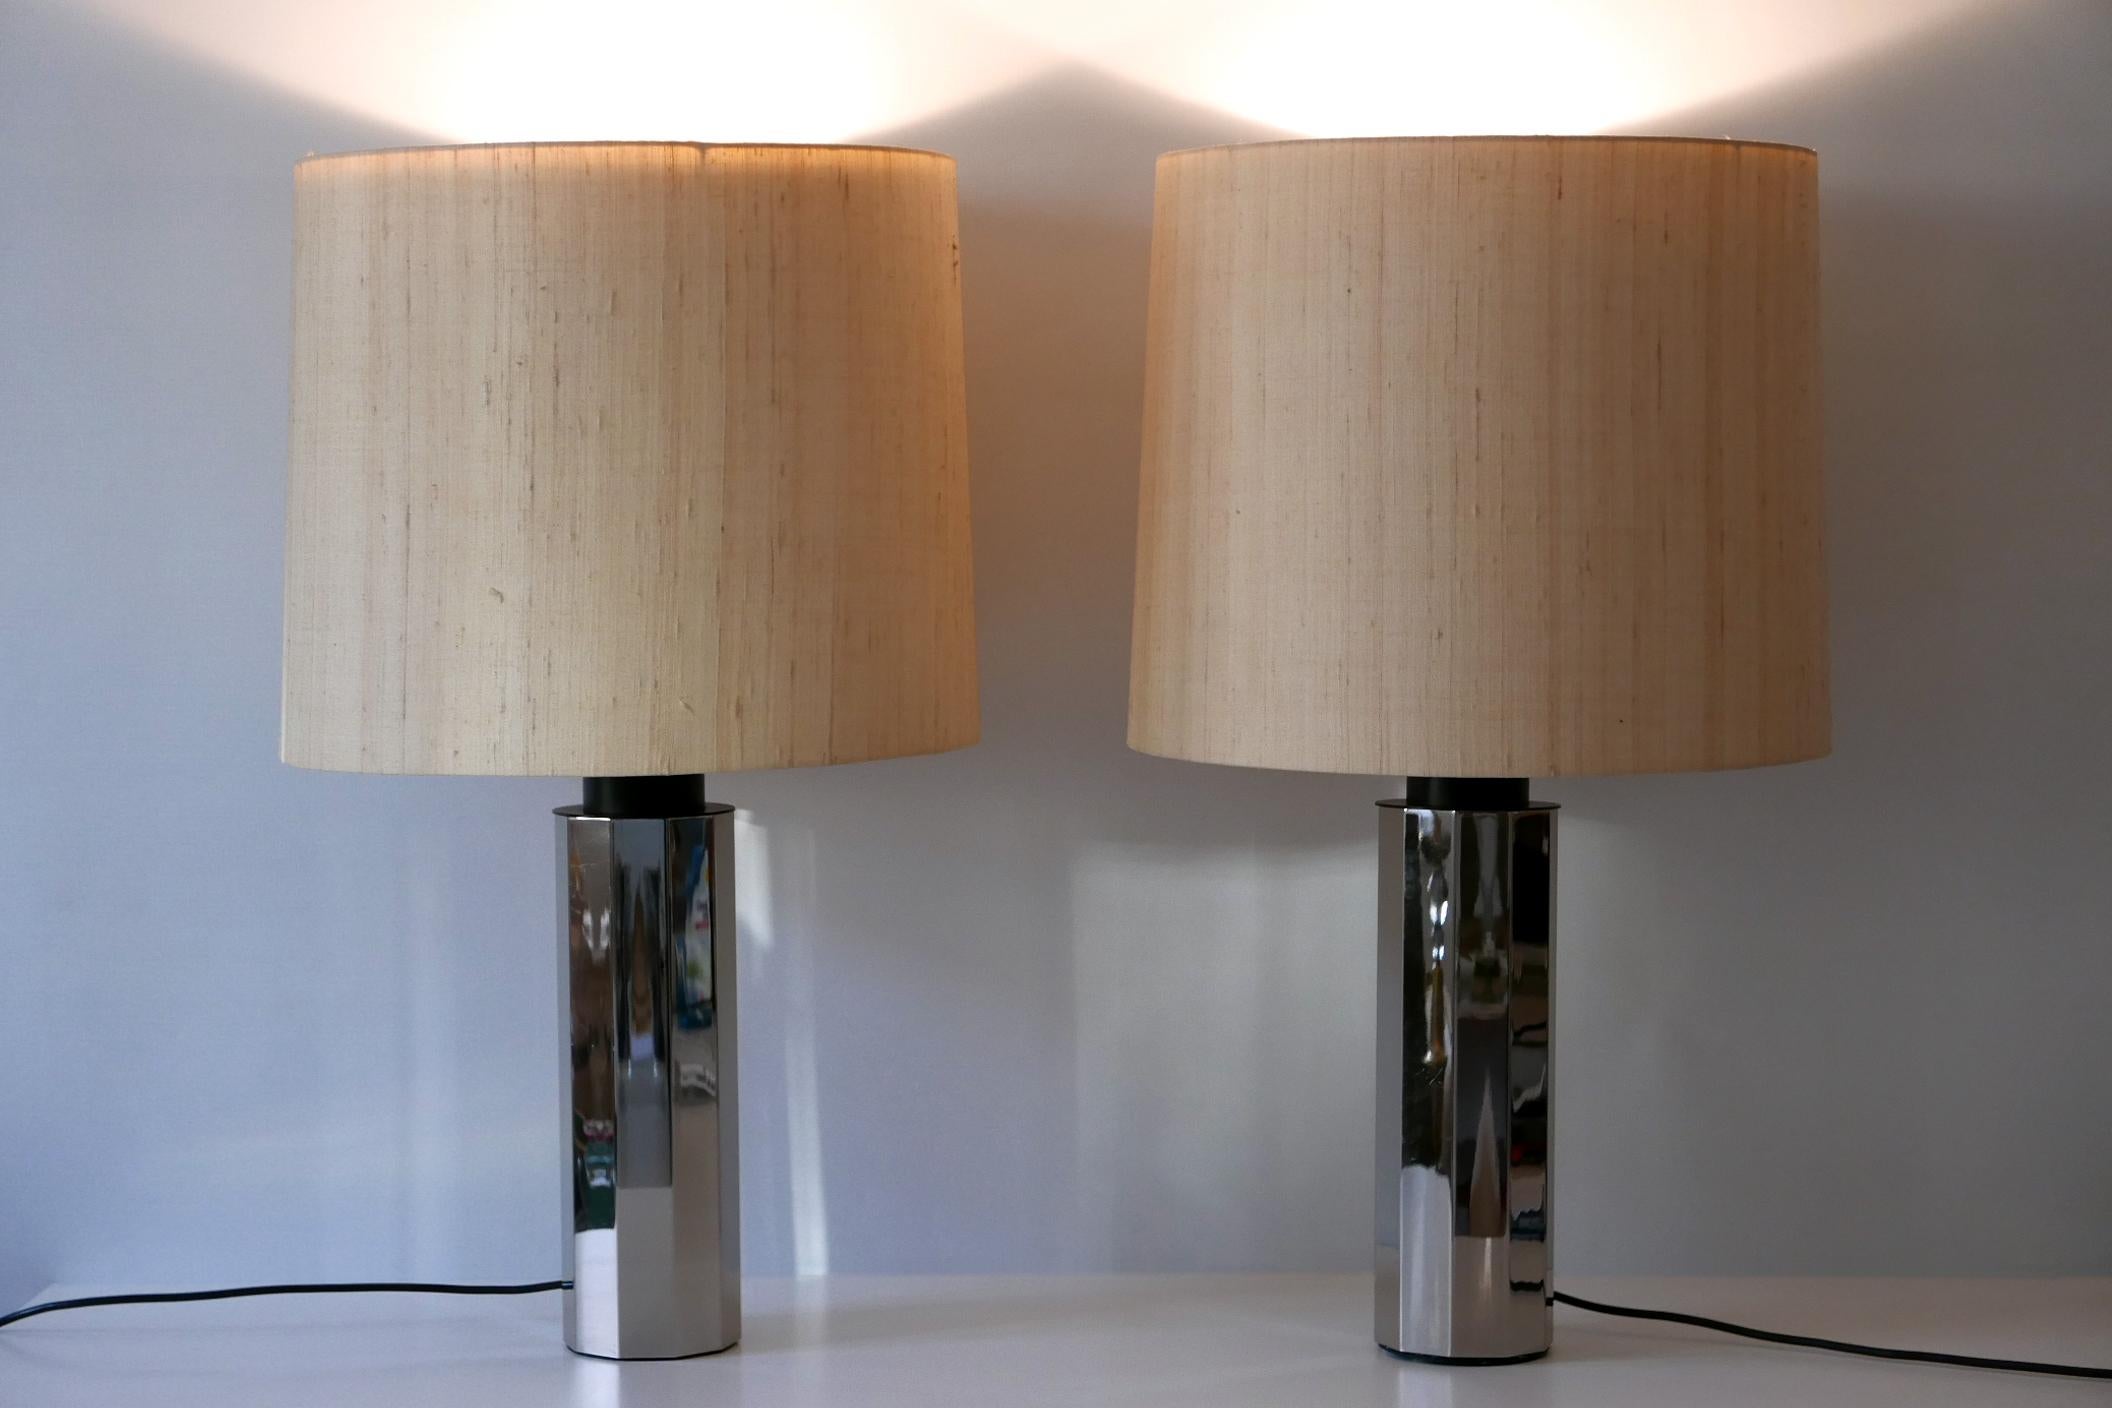 Set of Two Huge, 5-Flamed Midcentury Decagonal Chrome Table Lamps 1960s, Germany For Sale 1